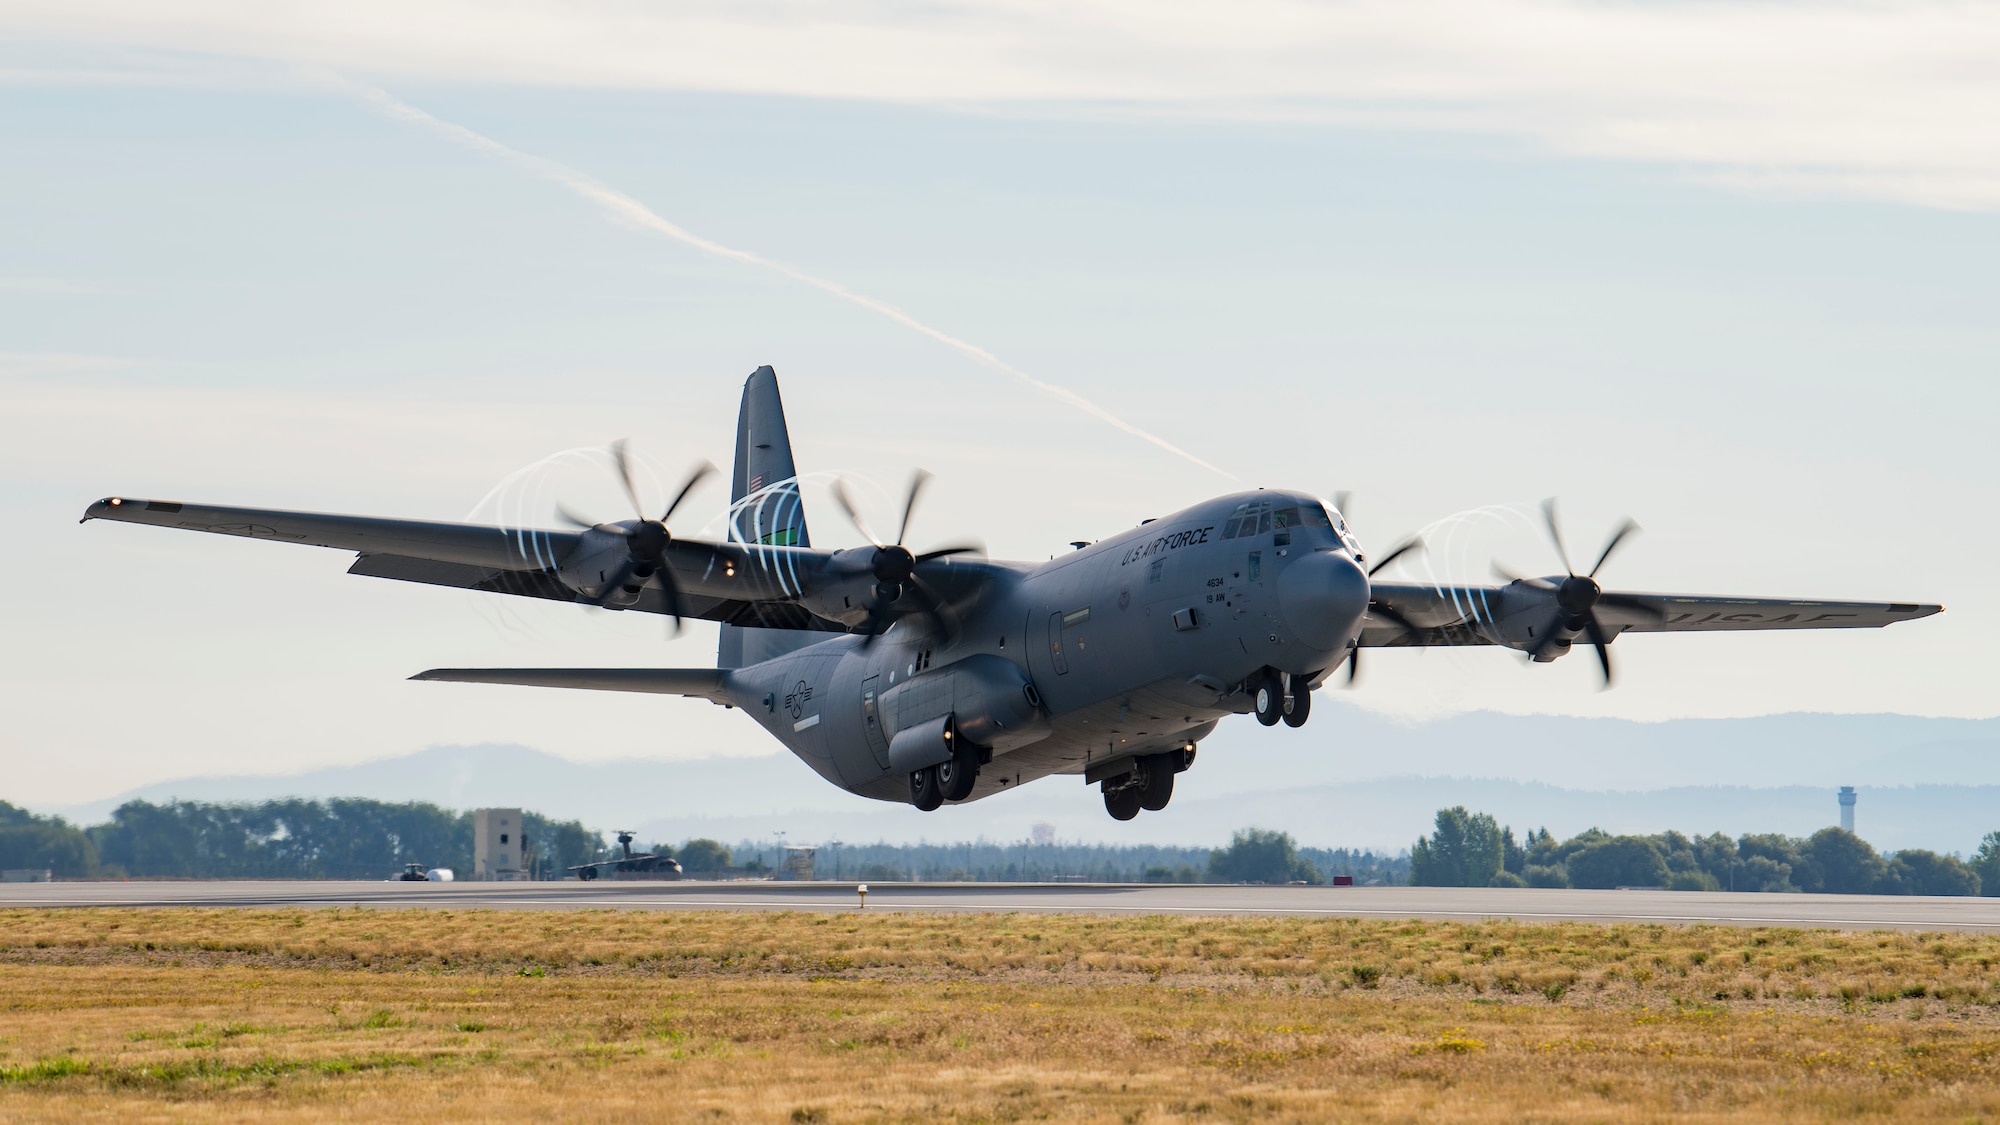 A U.S. Air Force C-130J Hercules from Little Rock Air Force Base, Arkansas, takes off during exercise Mobility Guardian 2019 at Fairchild Air Force Base, Washington, Sept. 12, 2019. Through robust and relevant training, Mobility Guardian is designed to build full spectrum readiness and develop Mobility Airmen to ensure the delivery of Rapid Global Mobility now and in the future. (U.S. Air Force photo by Airman 1st Class Lawrence Sena)